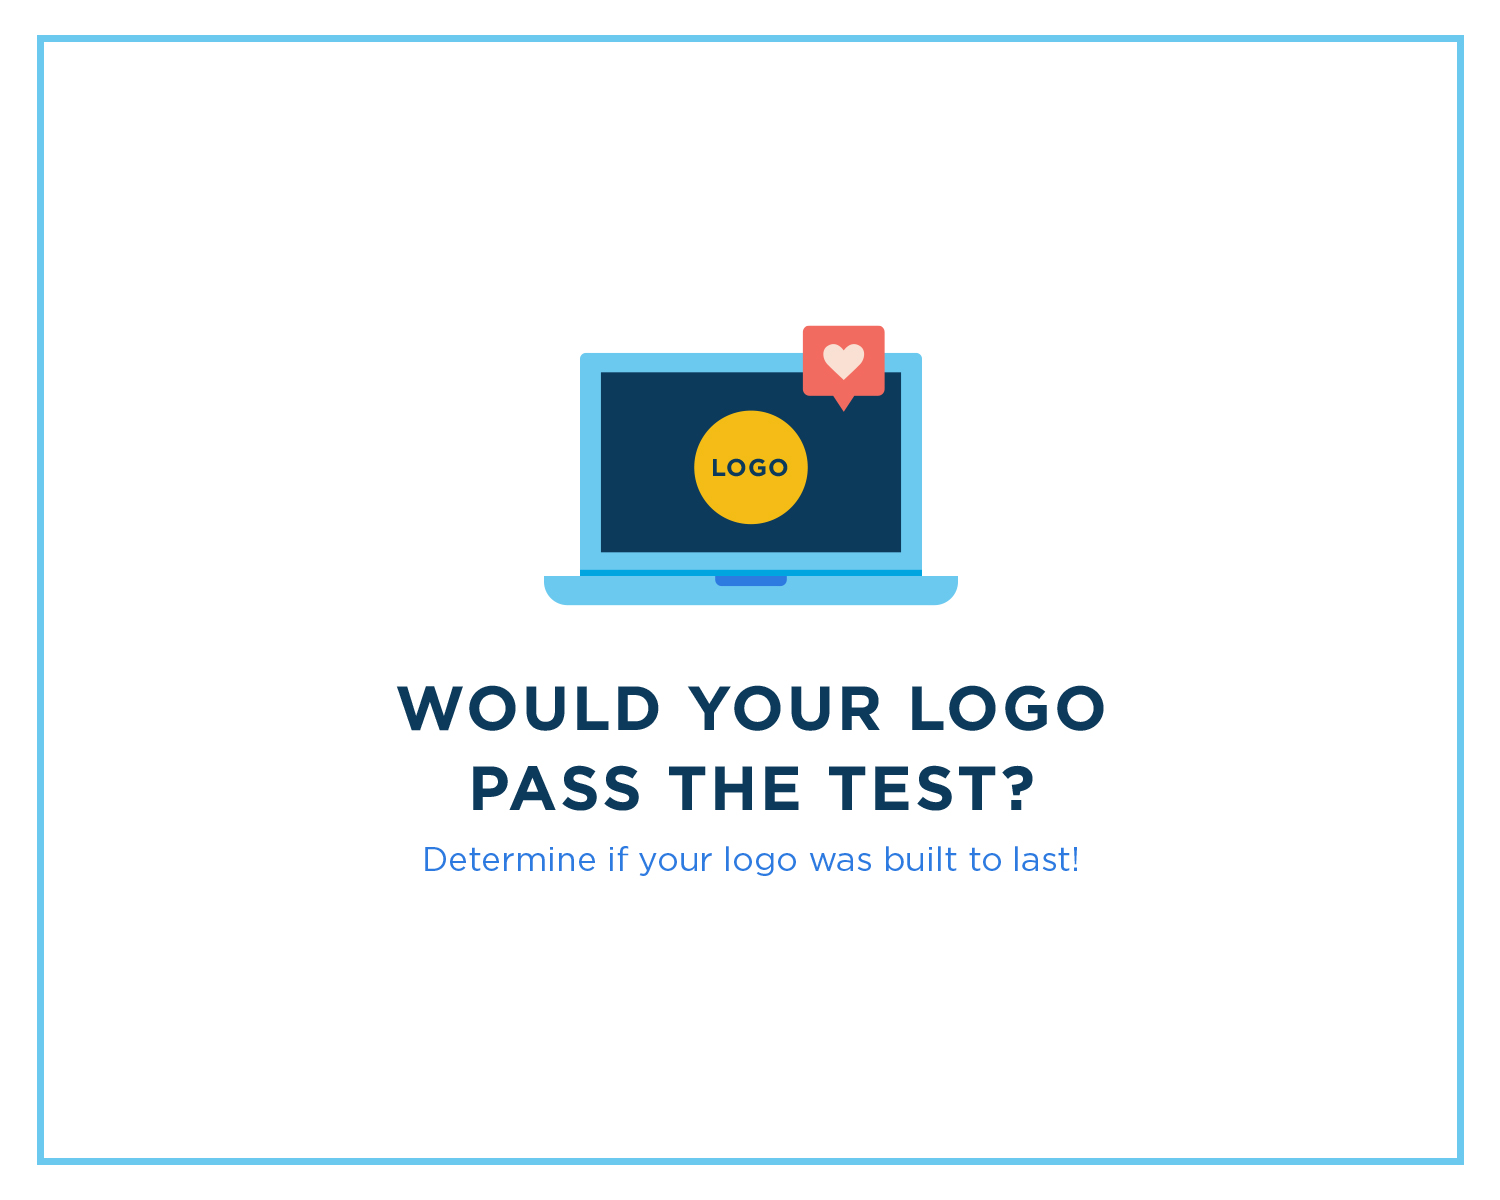 Would your logo pass the test?